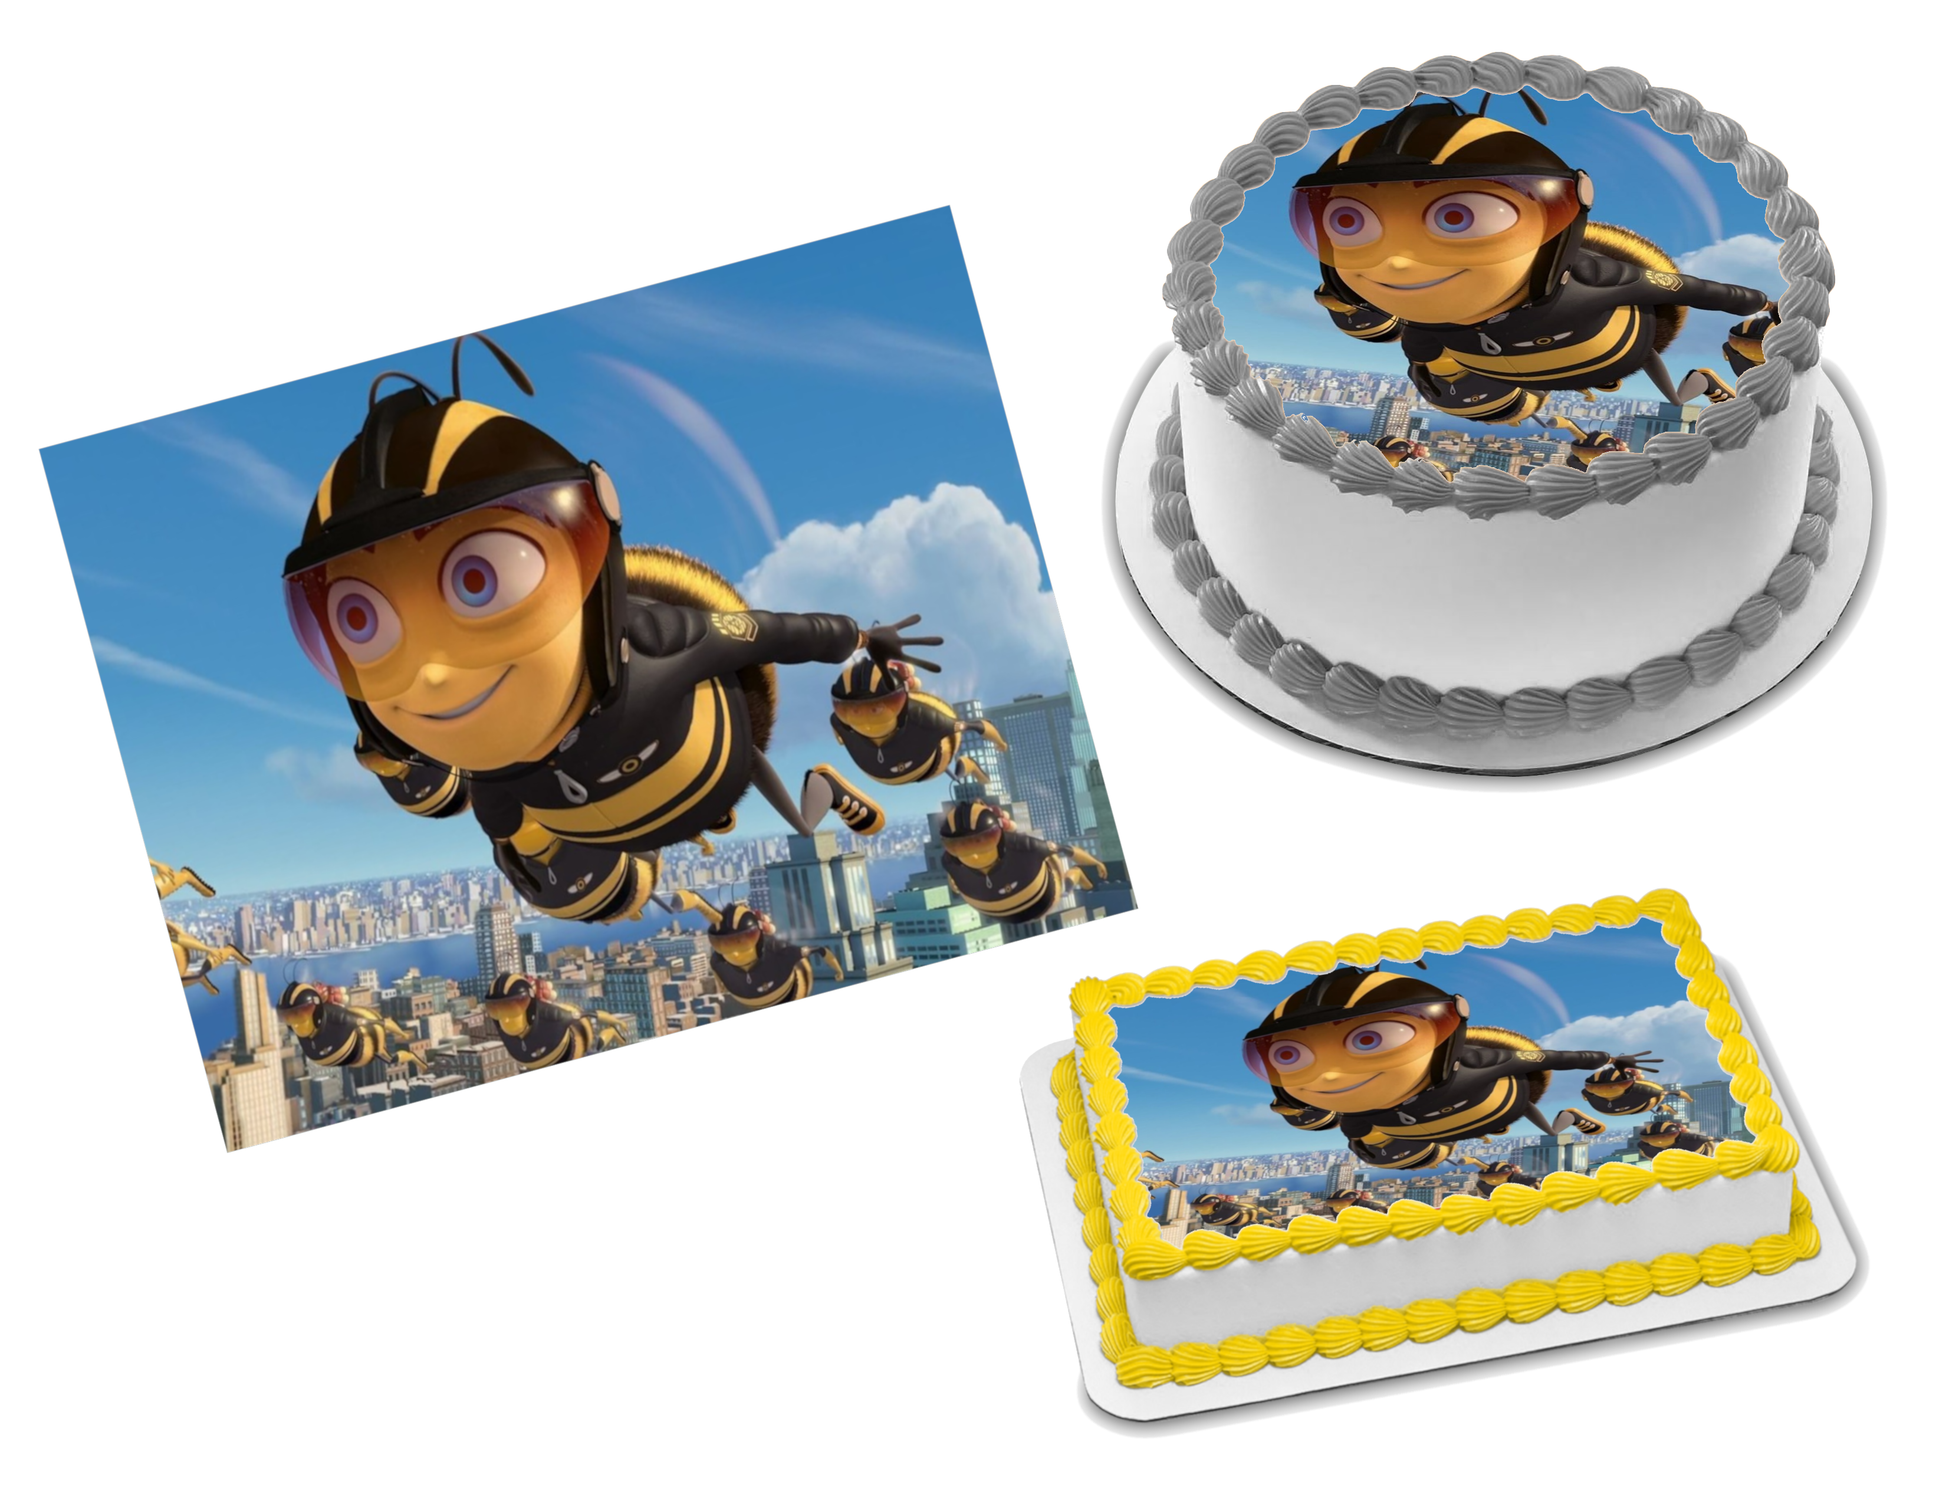  Edible Bee Cake Decorations, Bee Icing Decoration